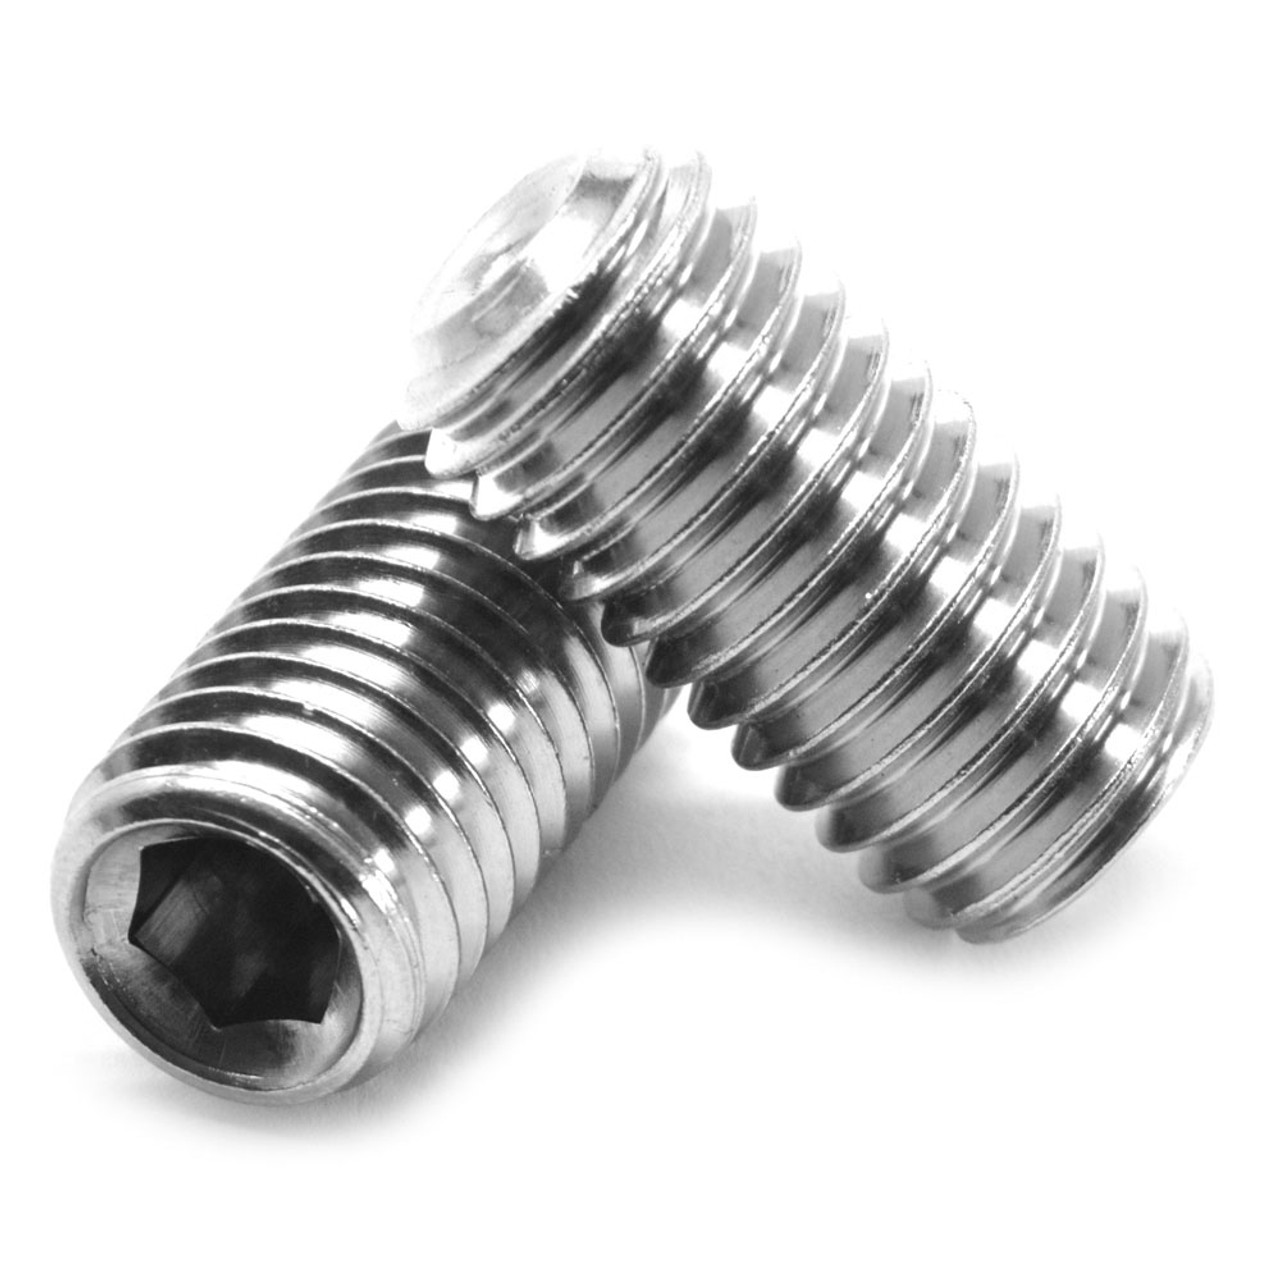 1/2"-13 x 1" Coarse Thread Socket Set Screw Cup Point Stainless Steel 18-8